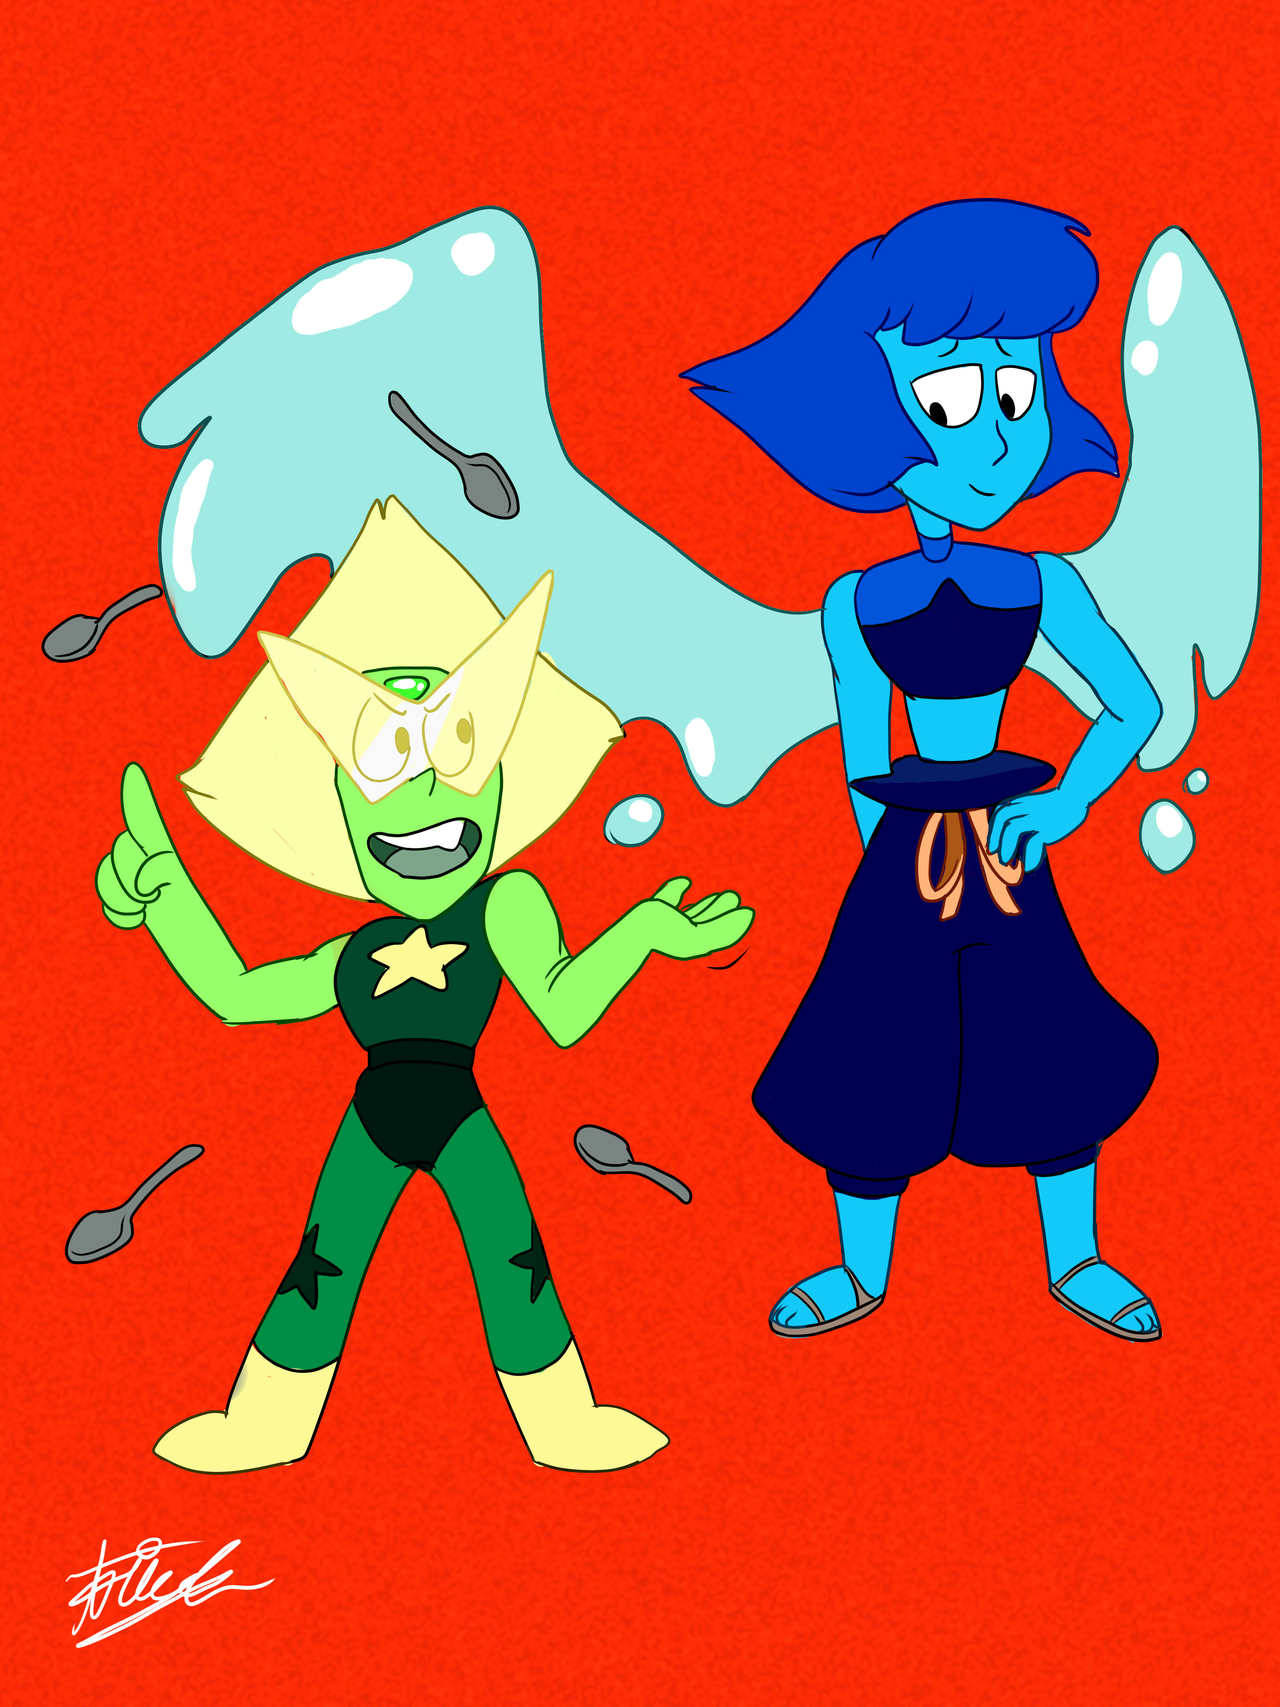 LOOK LAPIS I HAVE THE POWER OF SPOONS!